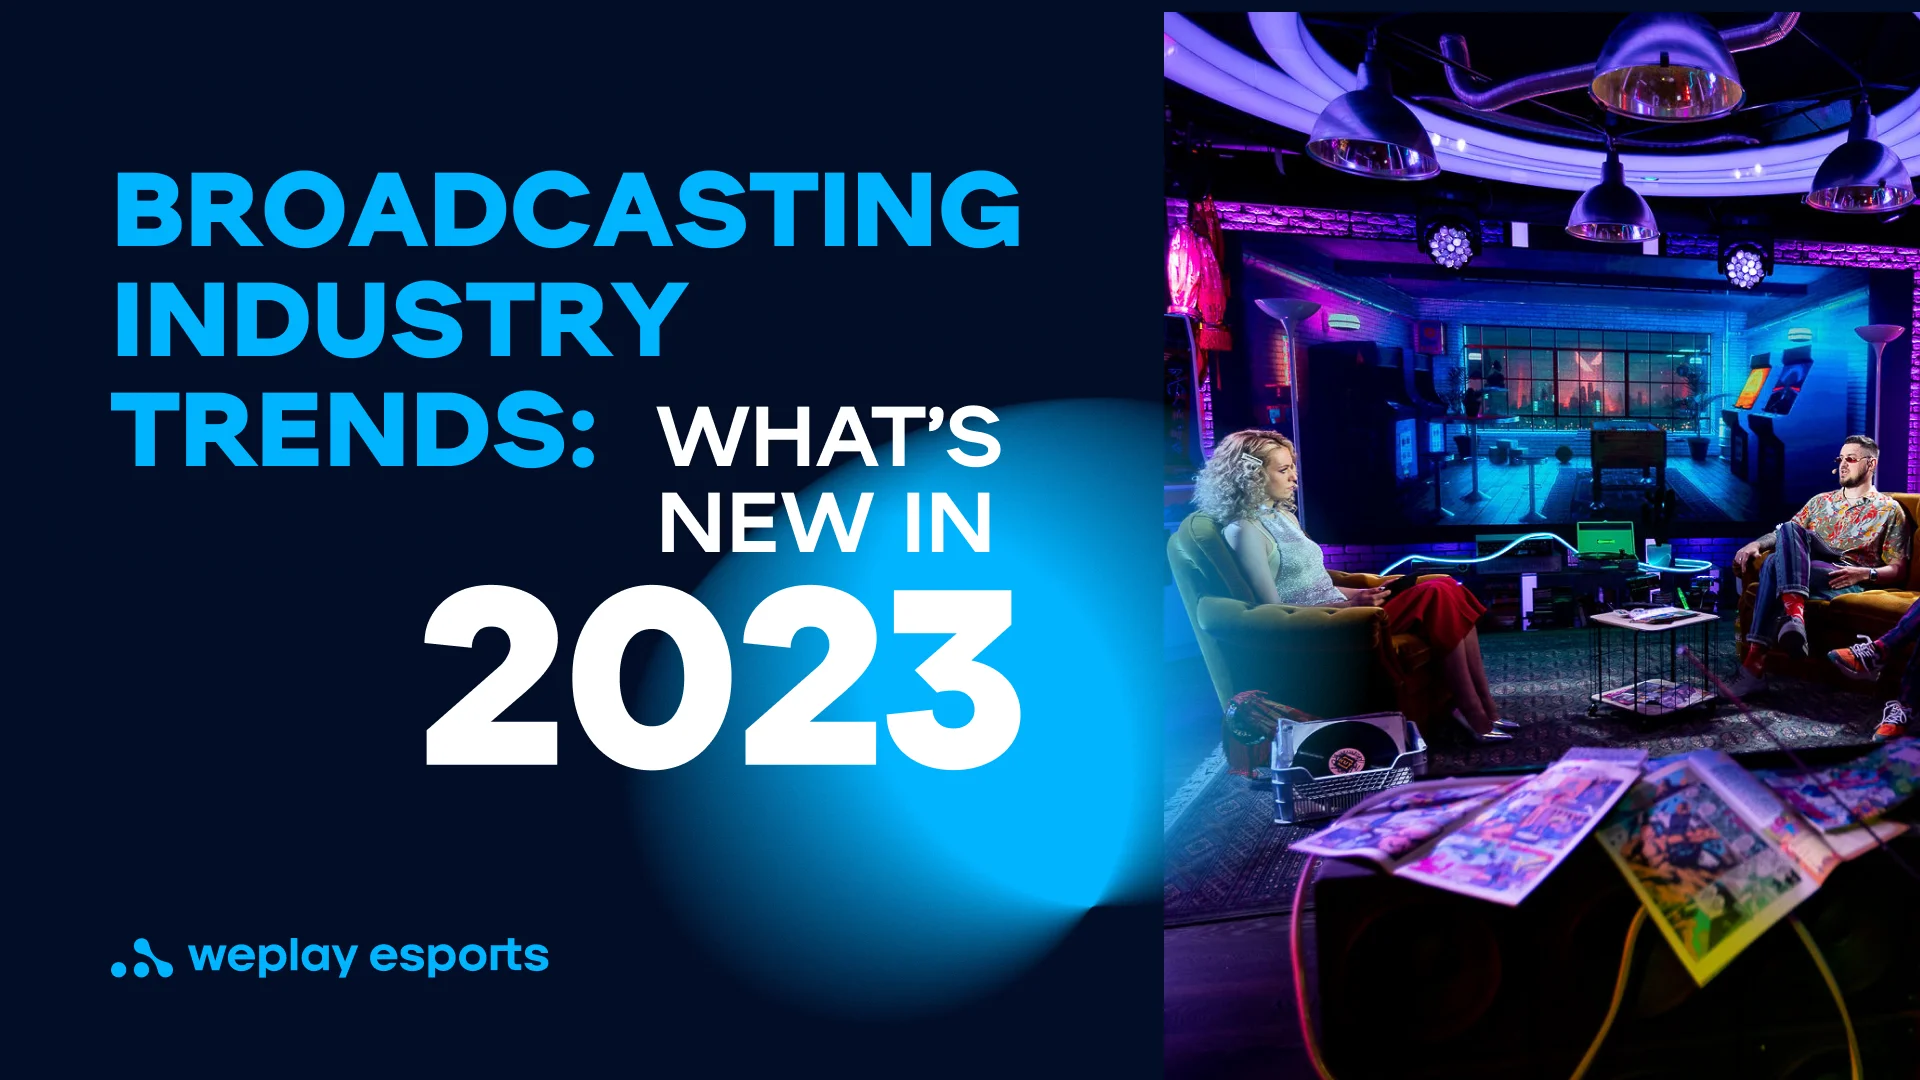 Broadcasting industry trends what’s new in 2023?